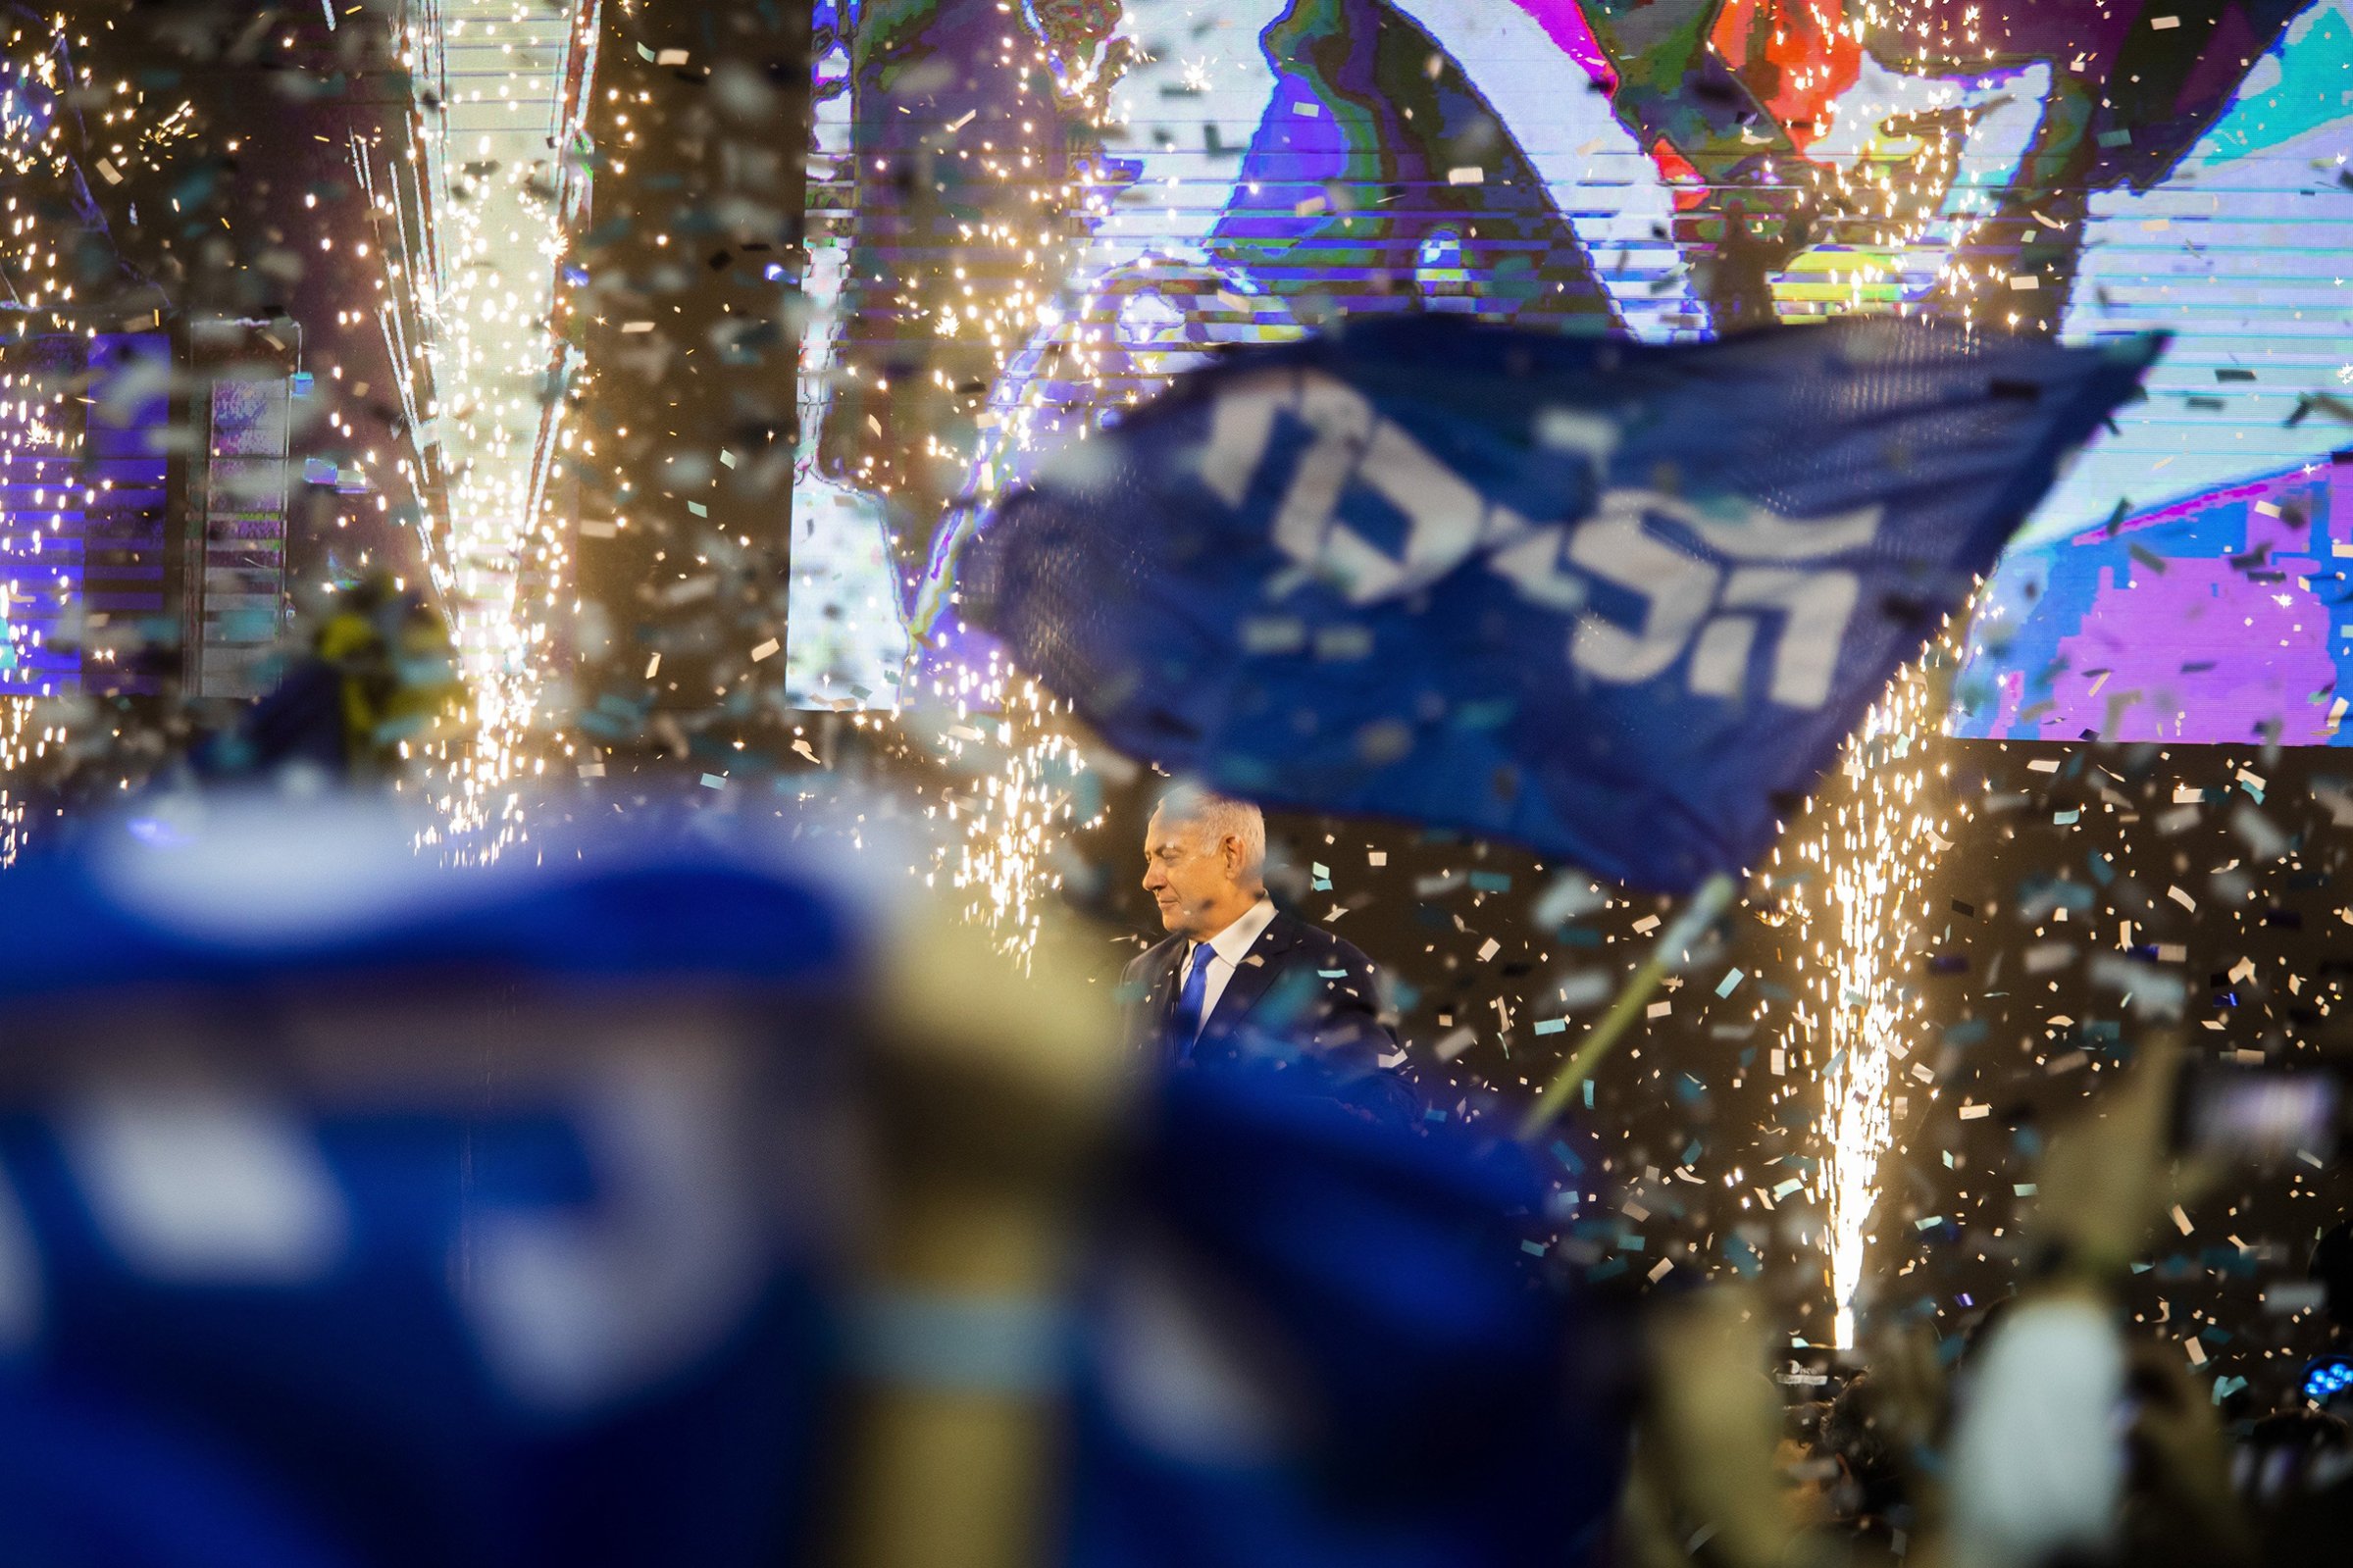 Netanyahu was feted by Likud party supporters at an election-night party in Tel Aviv Israel